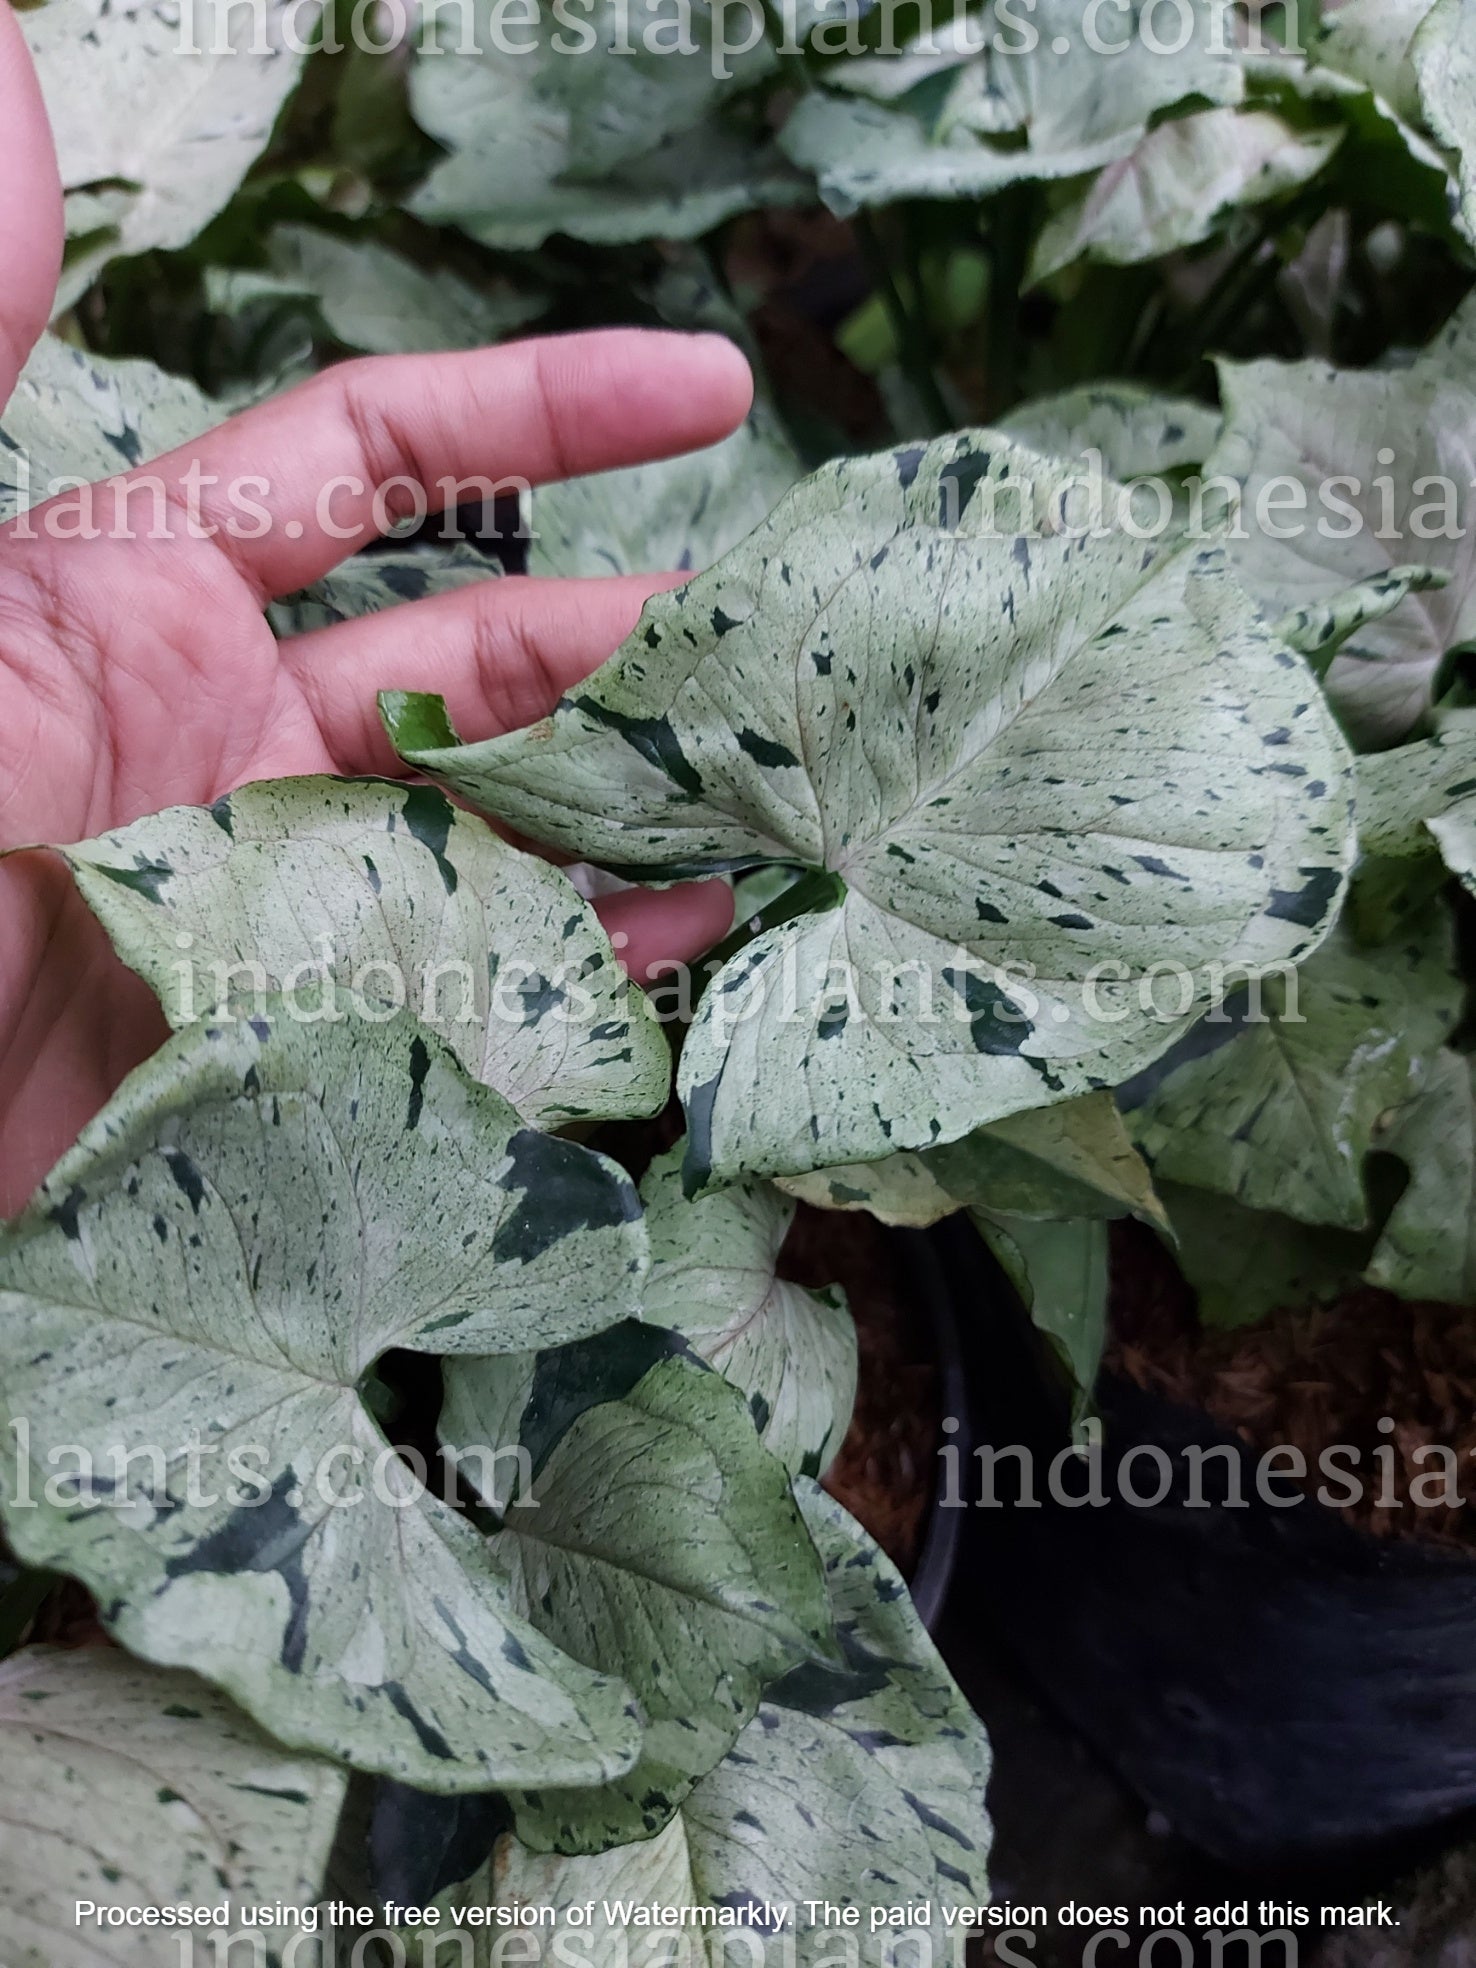 syngonium green splash is also known as syngonium gret ghost. they are popular today for its green tick colors all over the leaves. they like very indirect sunlight.